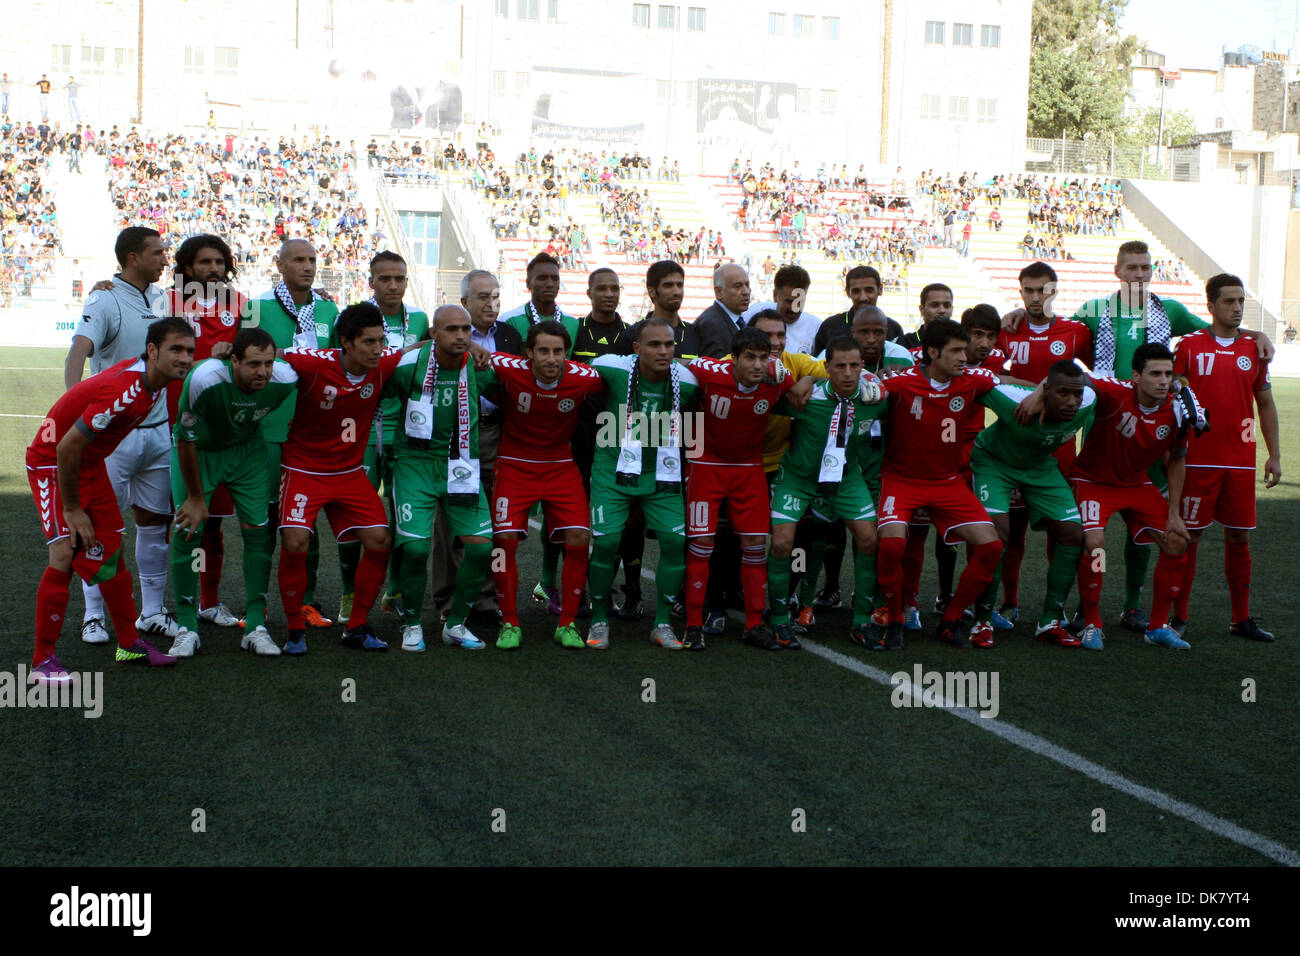 Jul 3, 2011 - Ramallah, West Bank - Palestinian players and Afghanistan players pose for pictures during a soccer match between the Palestinian and Afghanistan national teams in the West bank city of Ramallah, Sunday. The Palestinian national soccer team drew 1-1 against Afghanistan on Sunday, a score that advances the Palestinians to the next qualifying round for the World Cup set Stock Photo